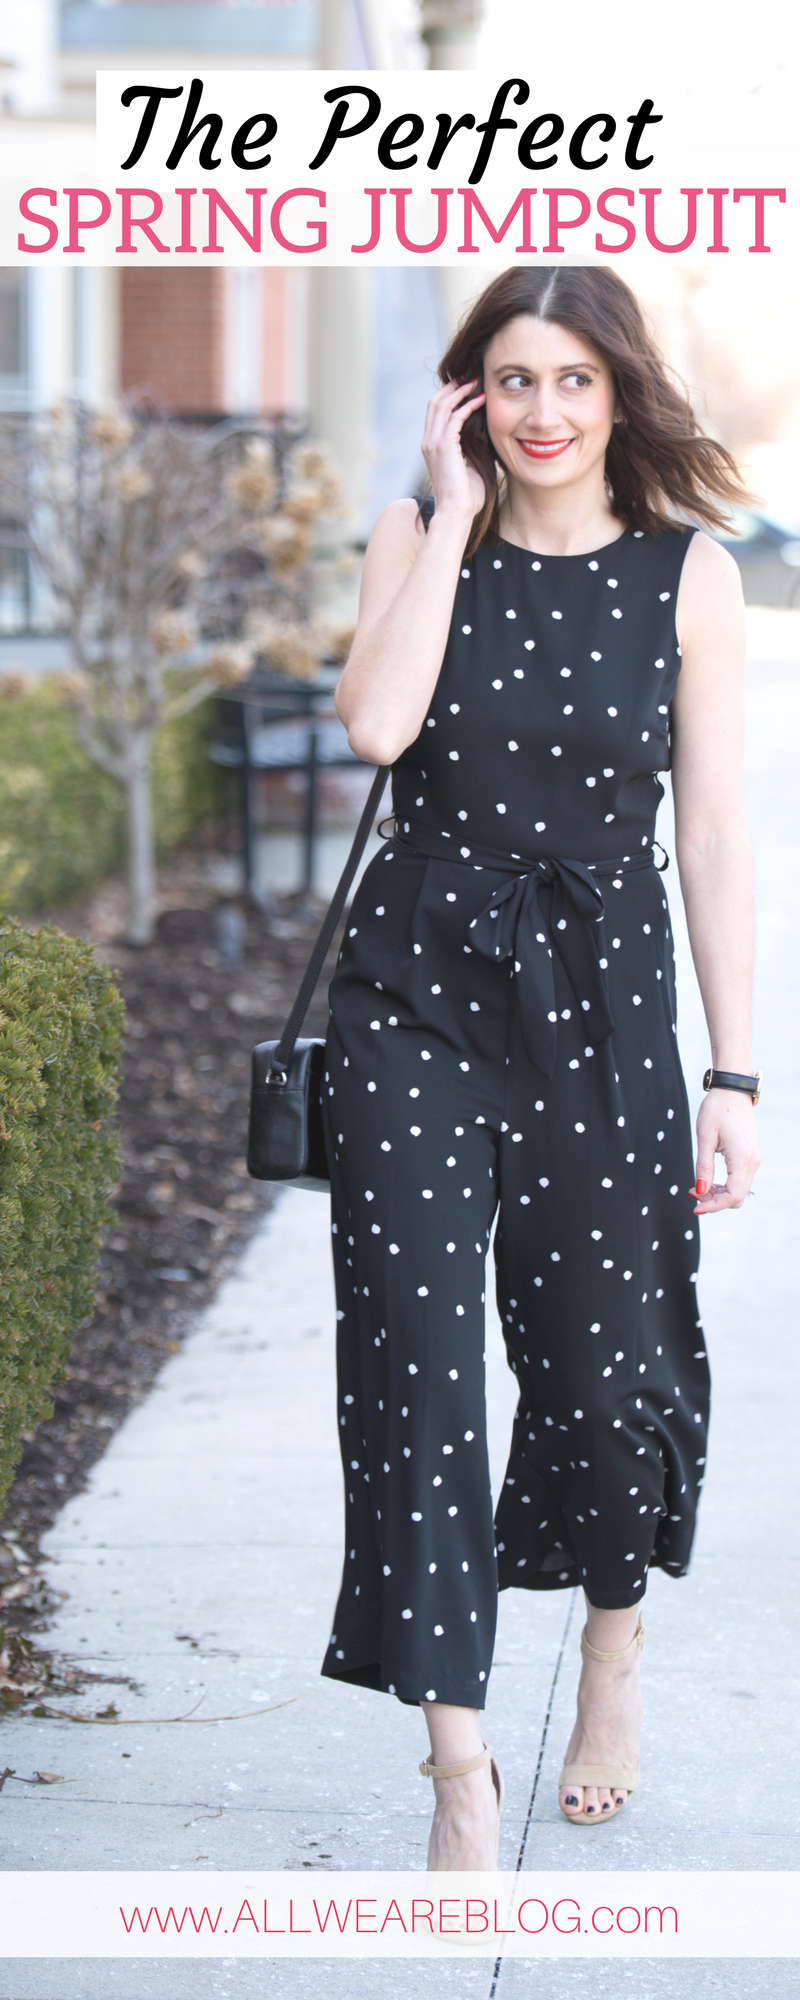 The Perfect Jumpsuit for Spring